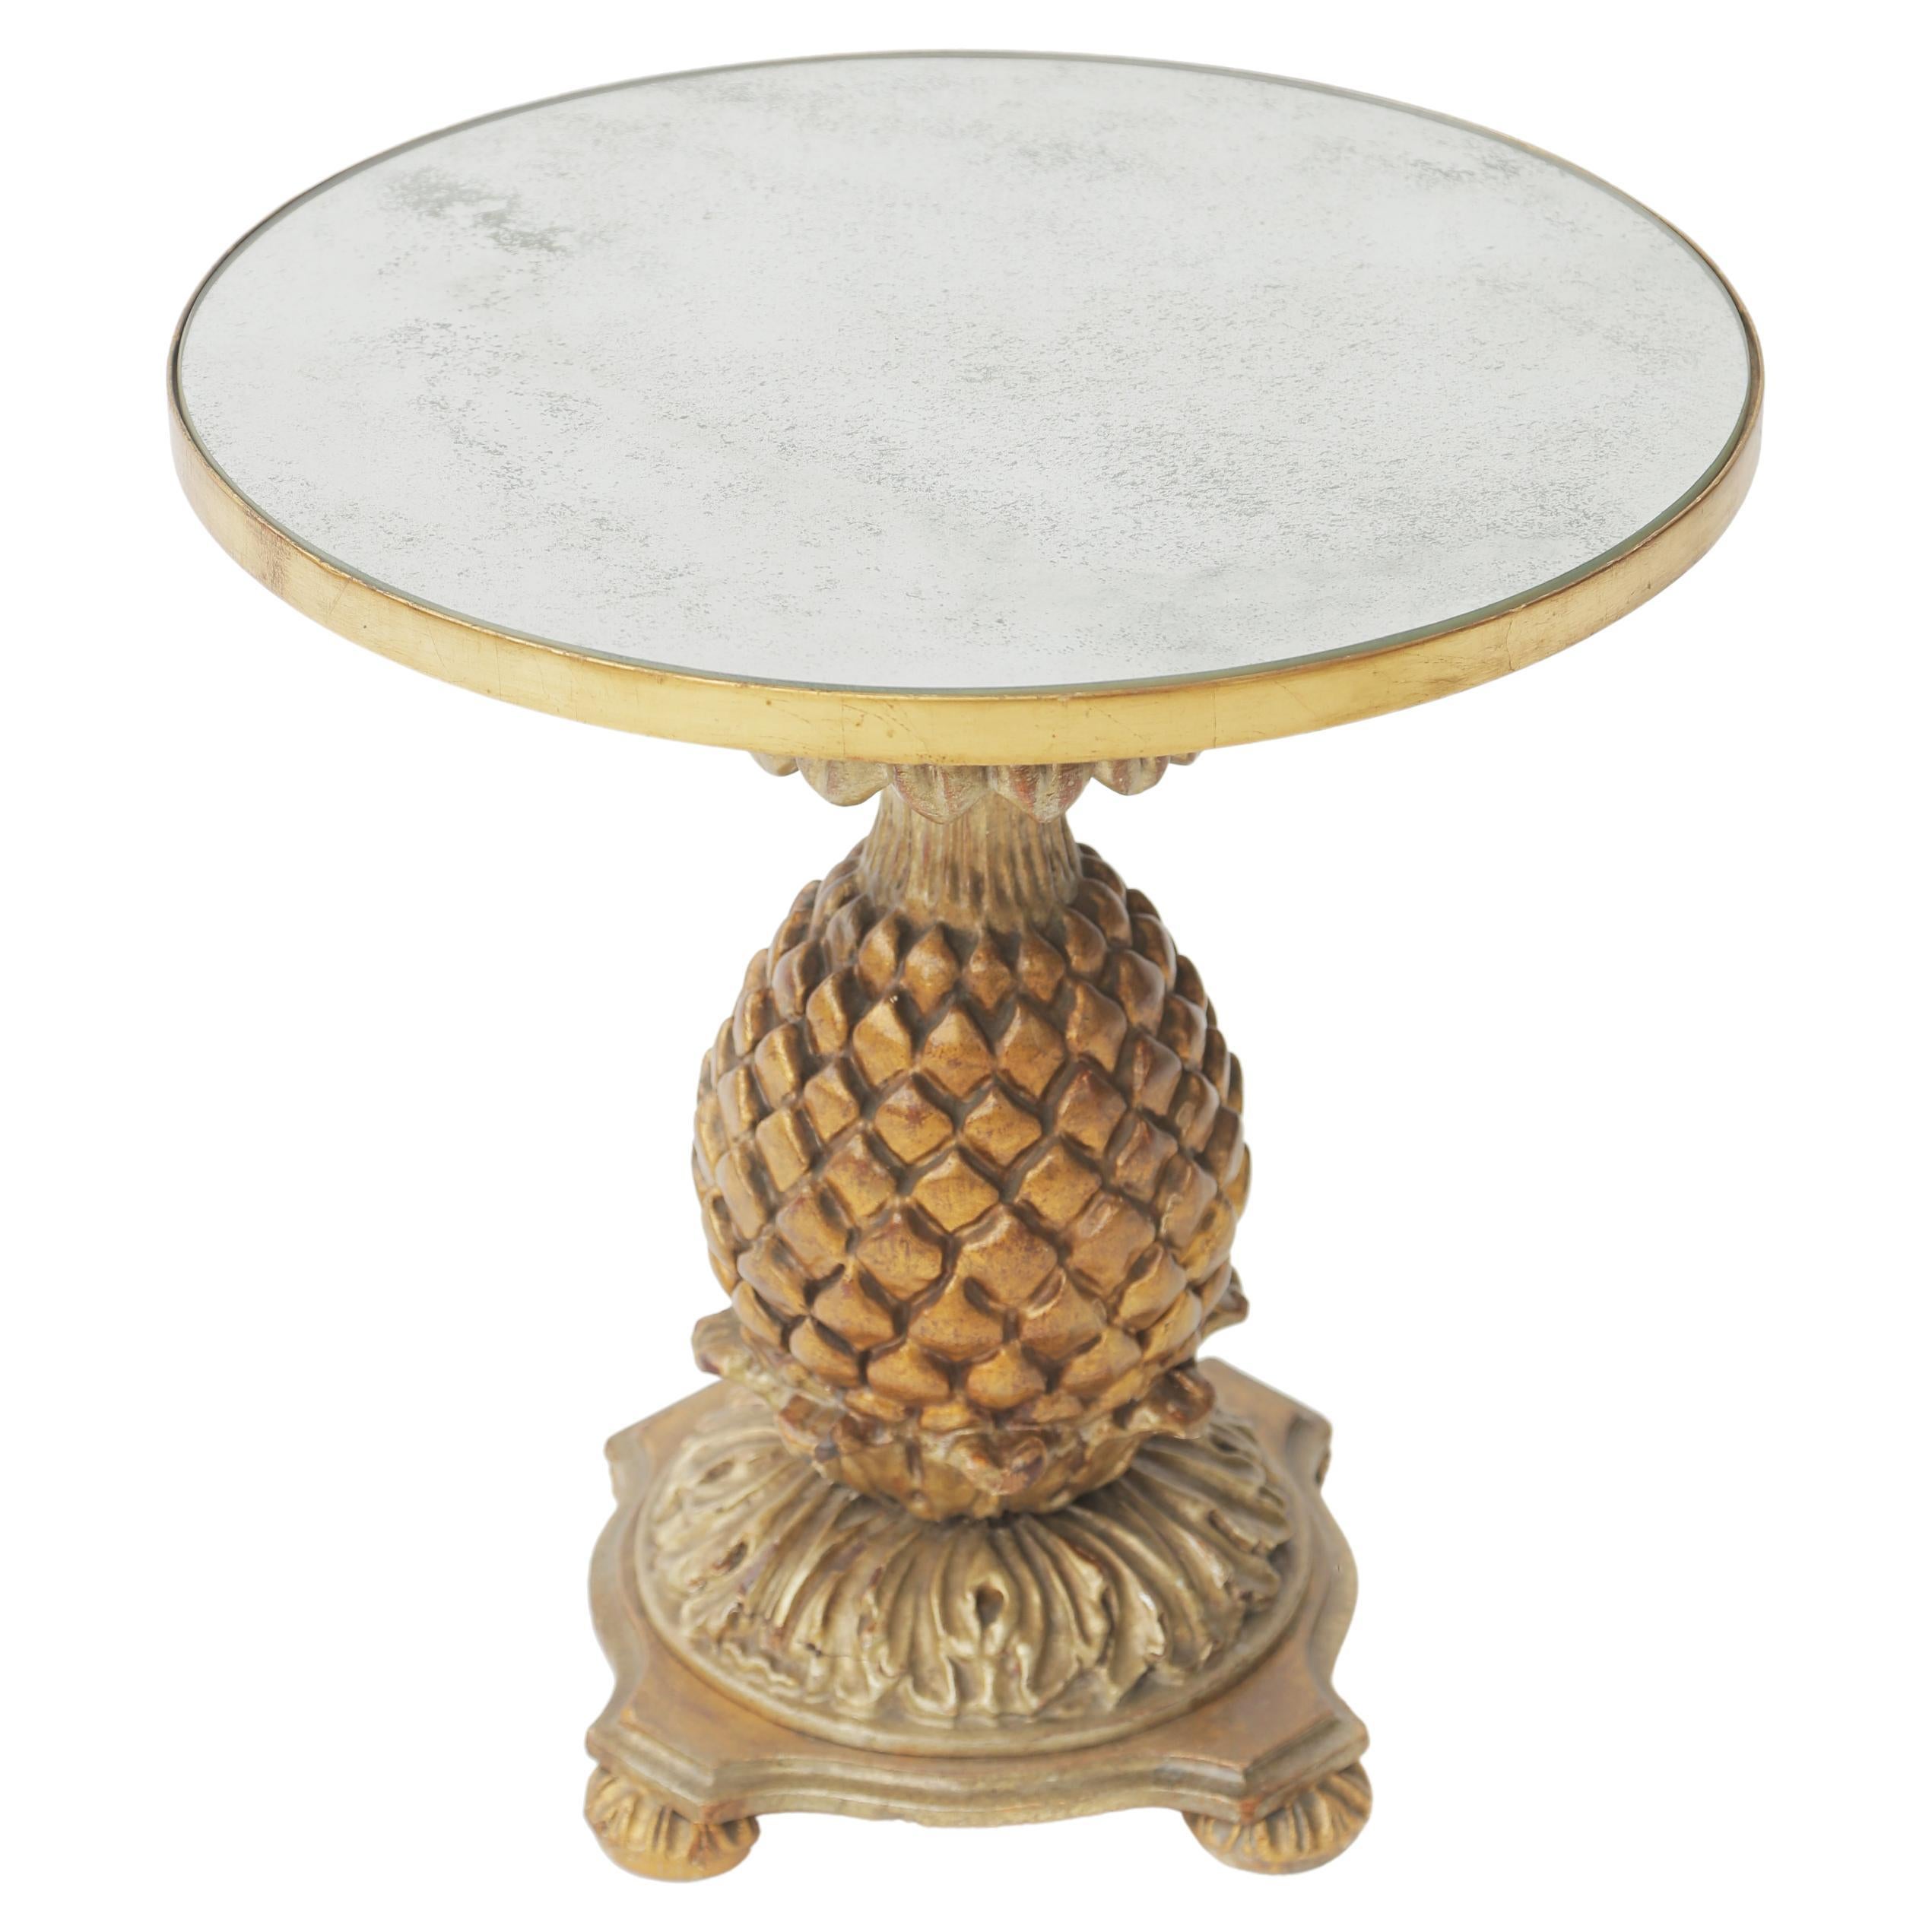 Vintage Italin Pineapple Accent Table with Mirrored Top For Sale